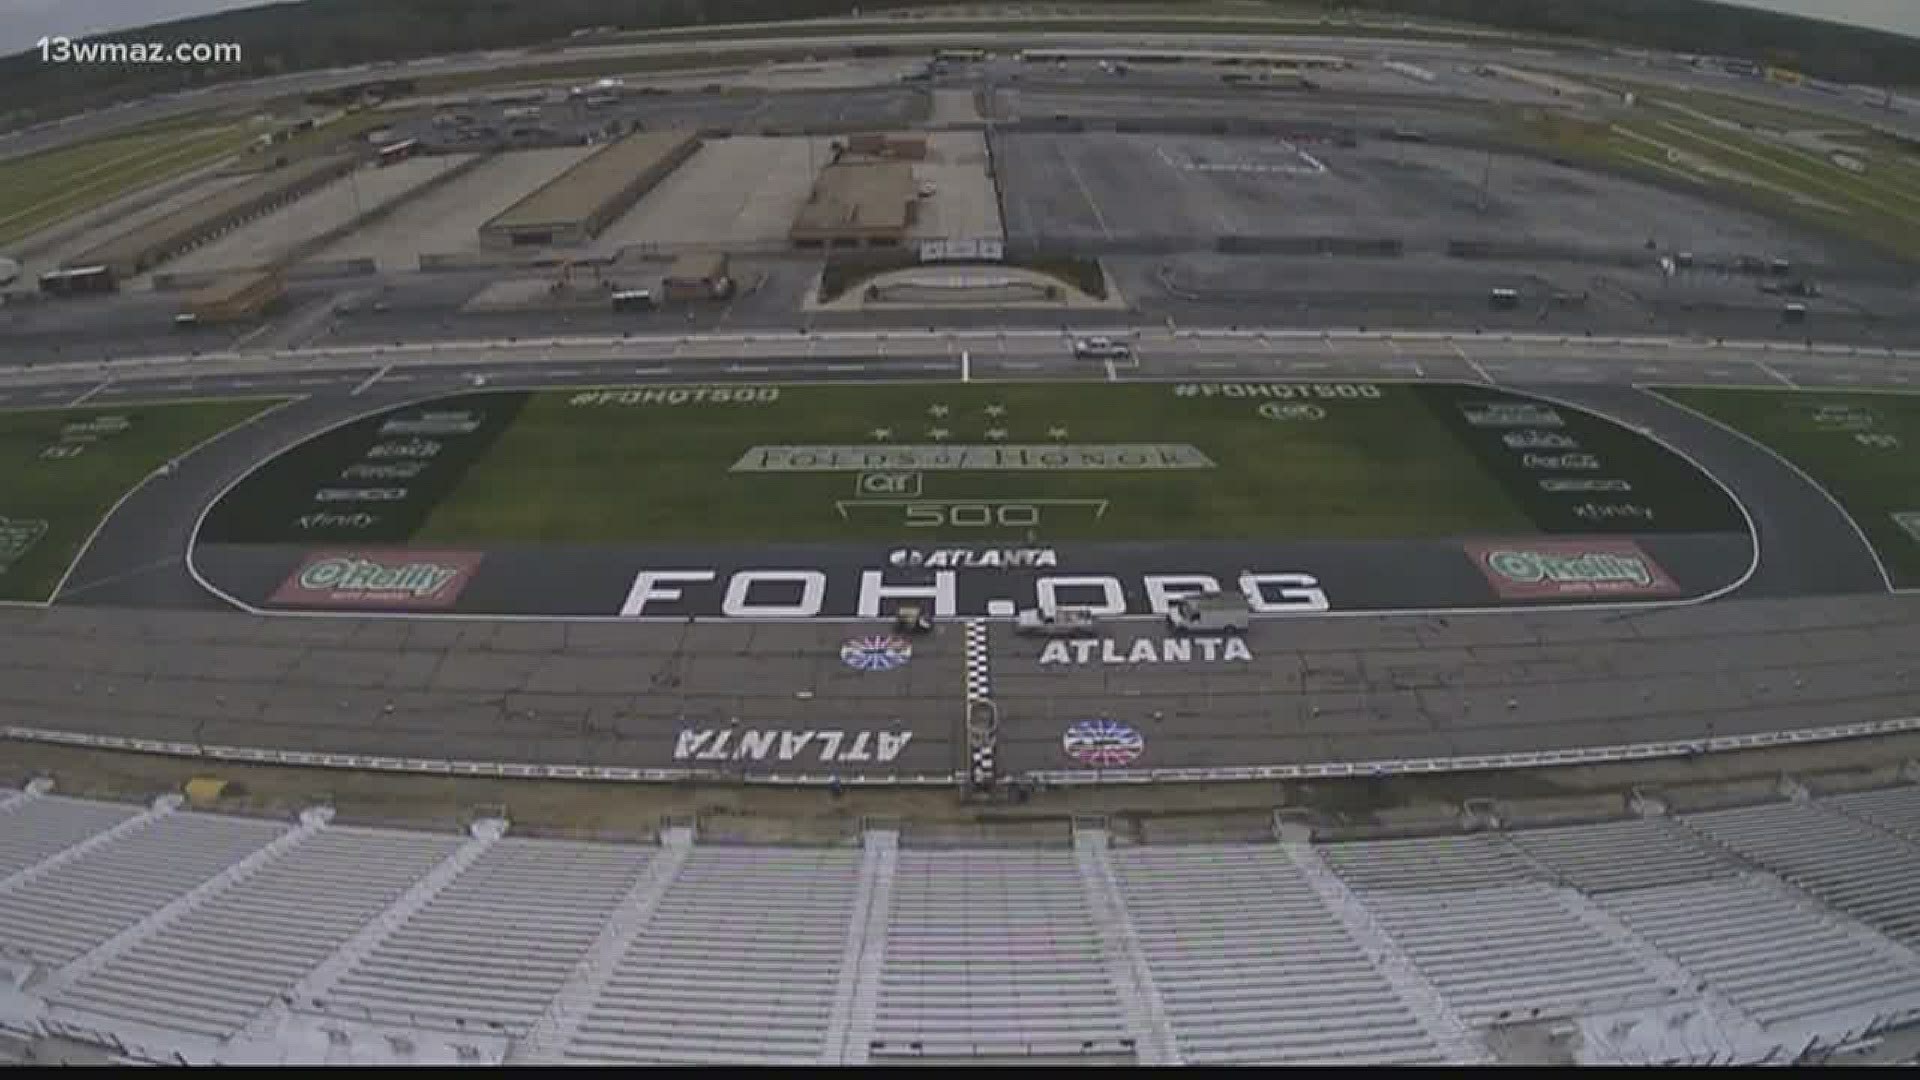 Atlanta Motor Speedway allowing fans to drive their cars on the track 13wmaz